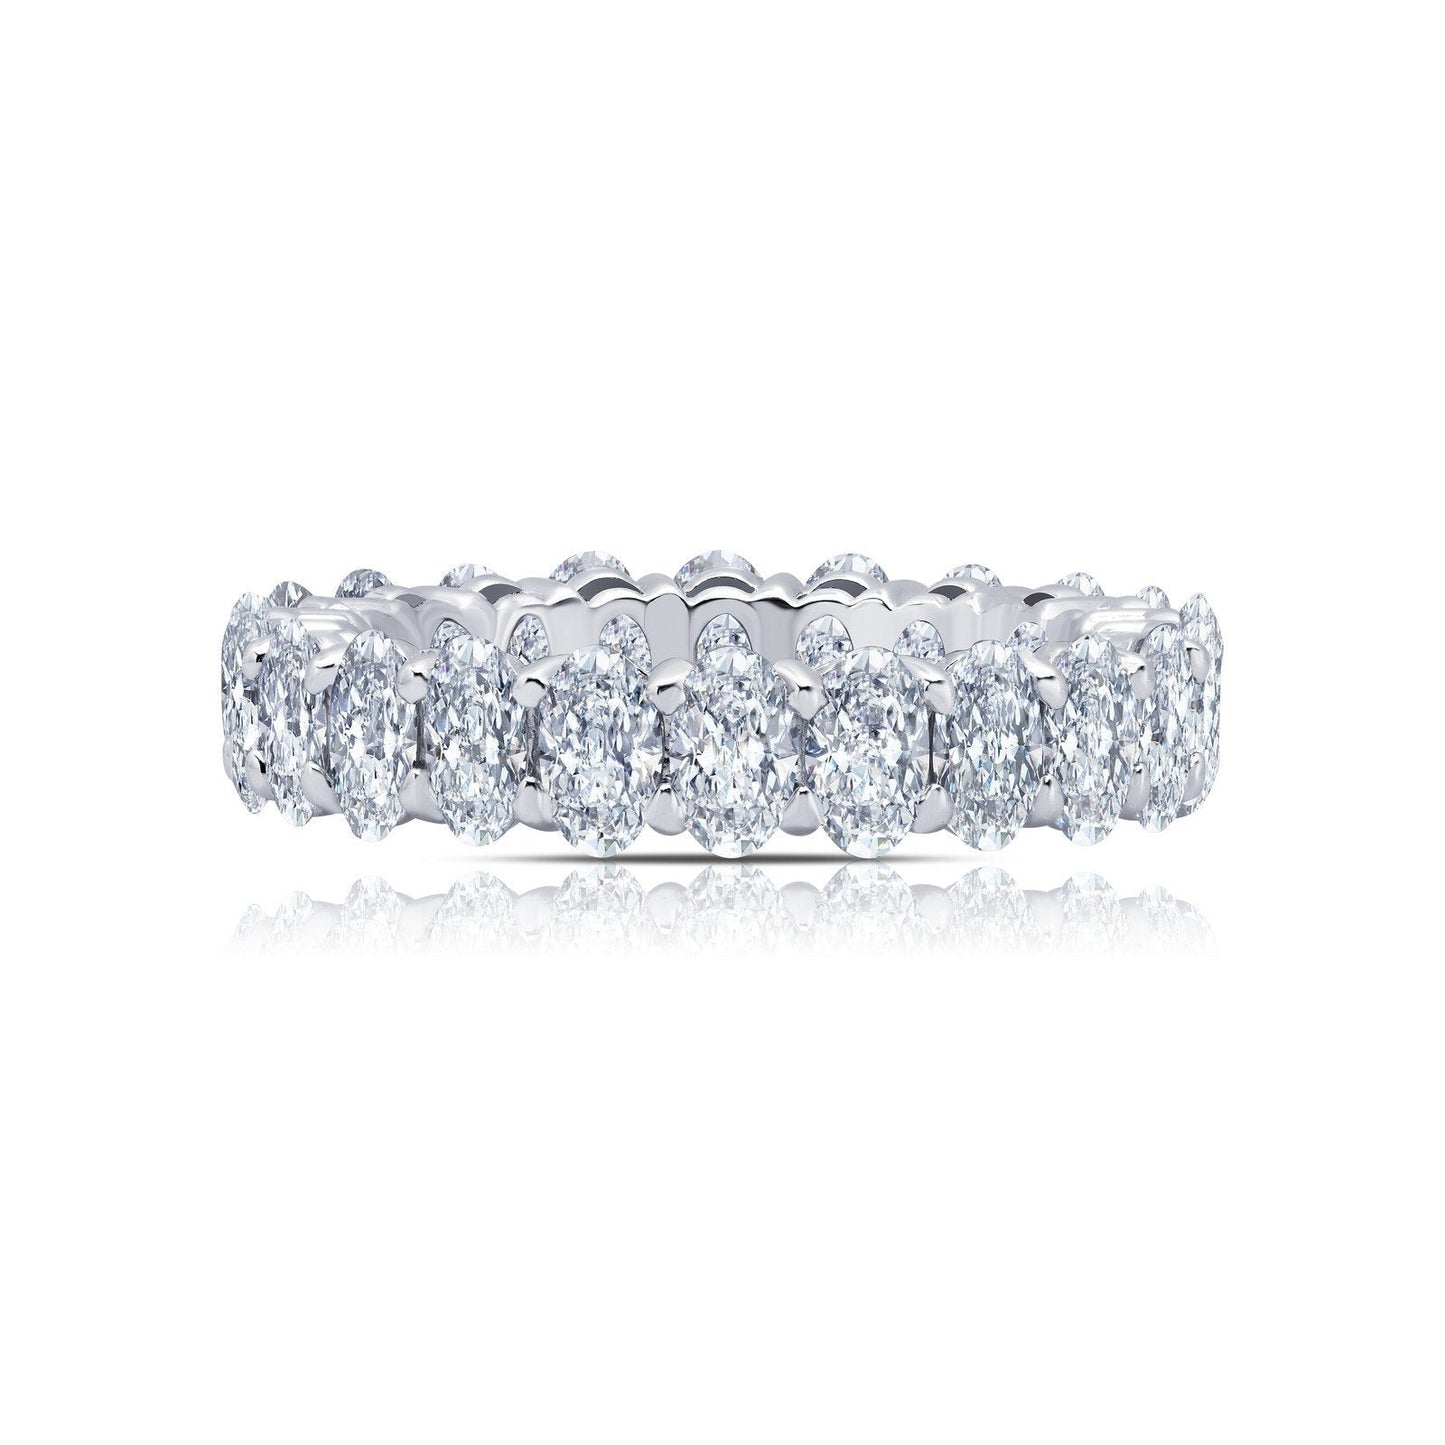 Lafonn 4.62 CTW Anniversary Eternity Band Simulated Diamond RINGS Size 7 Platinum 4.62 CTS Approx. 5mm (W)